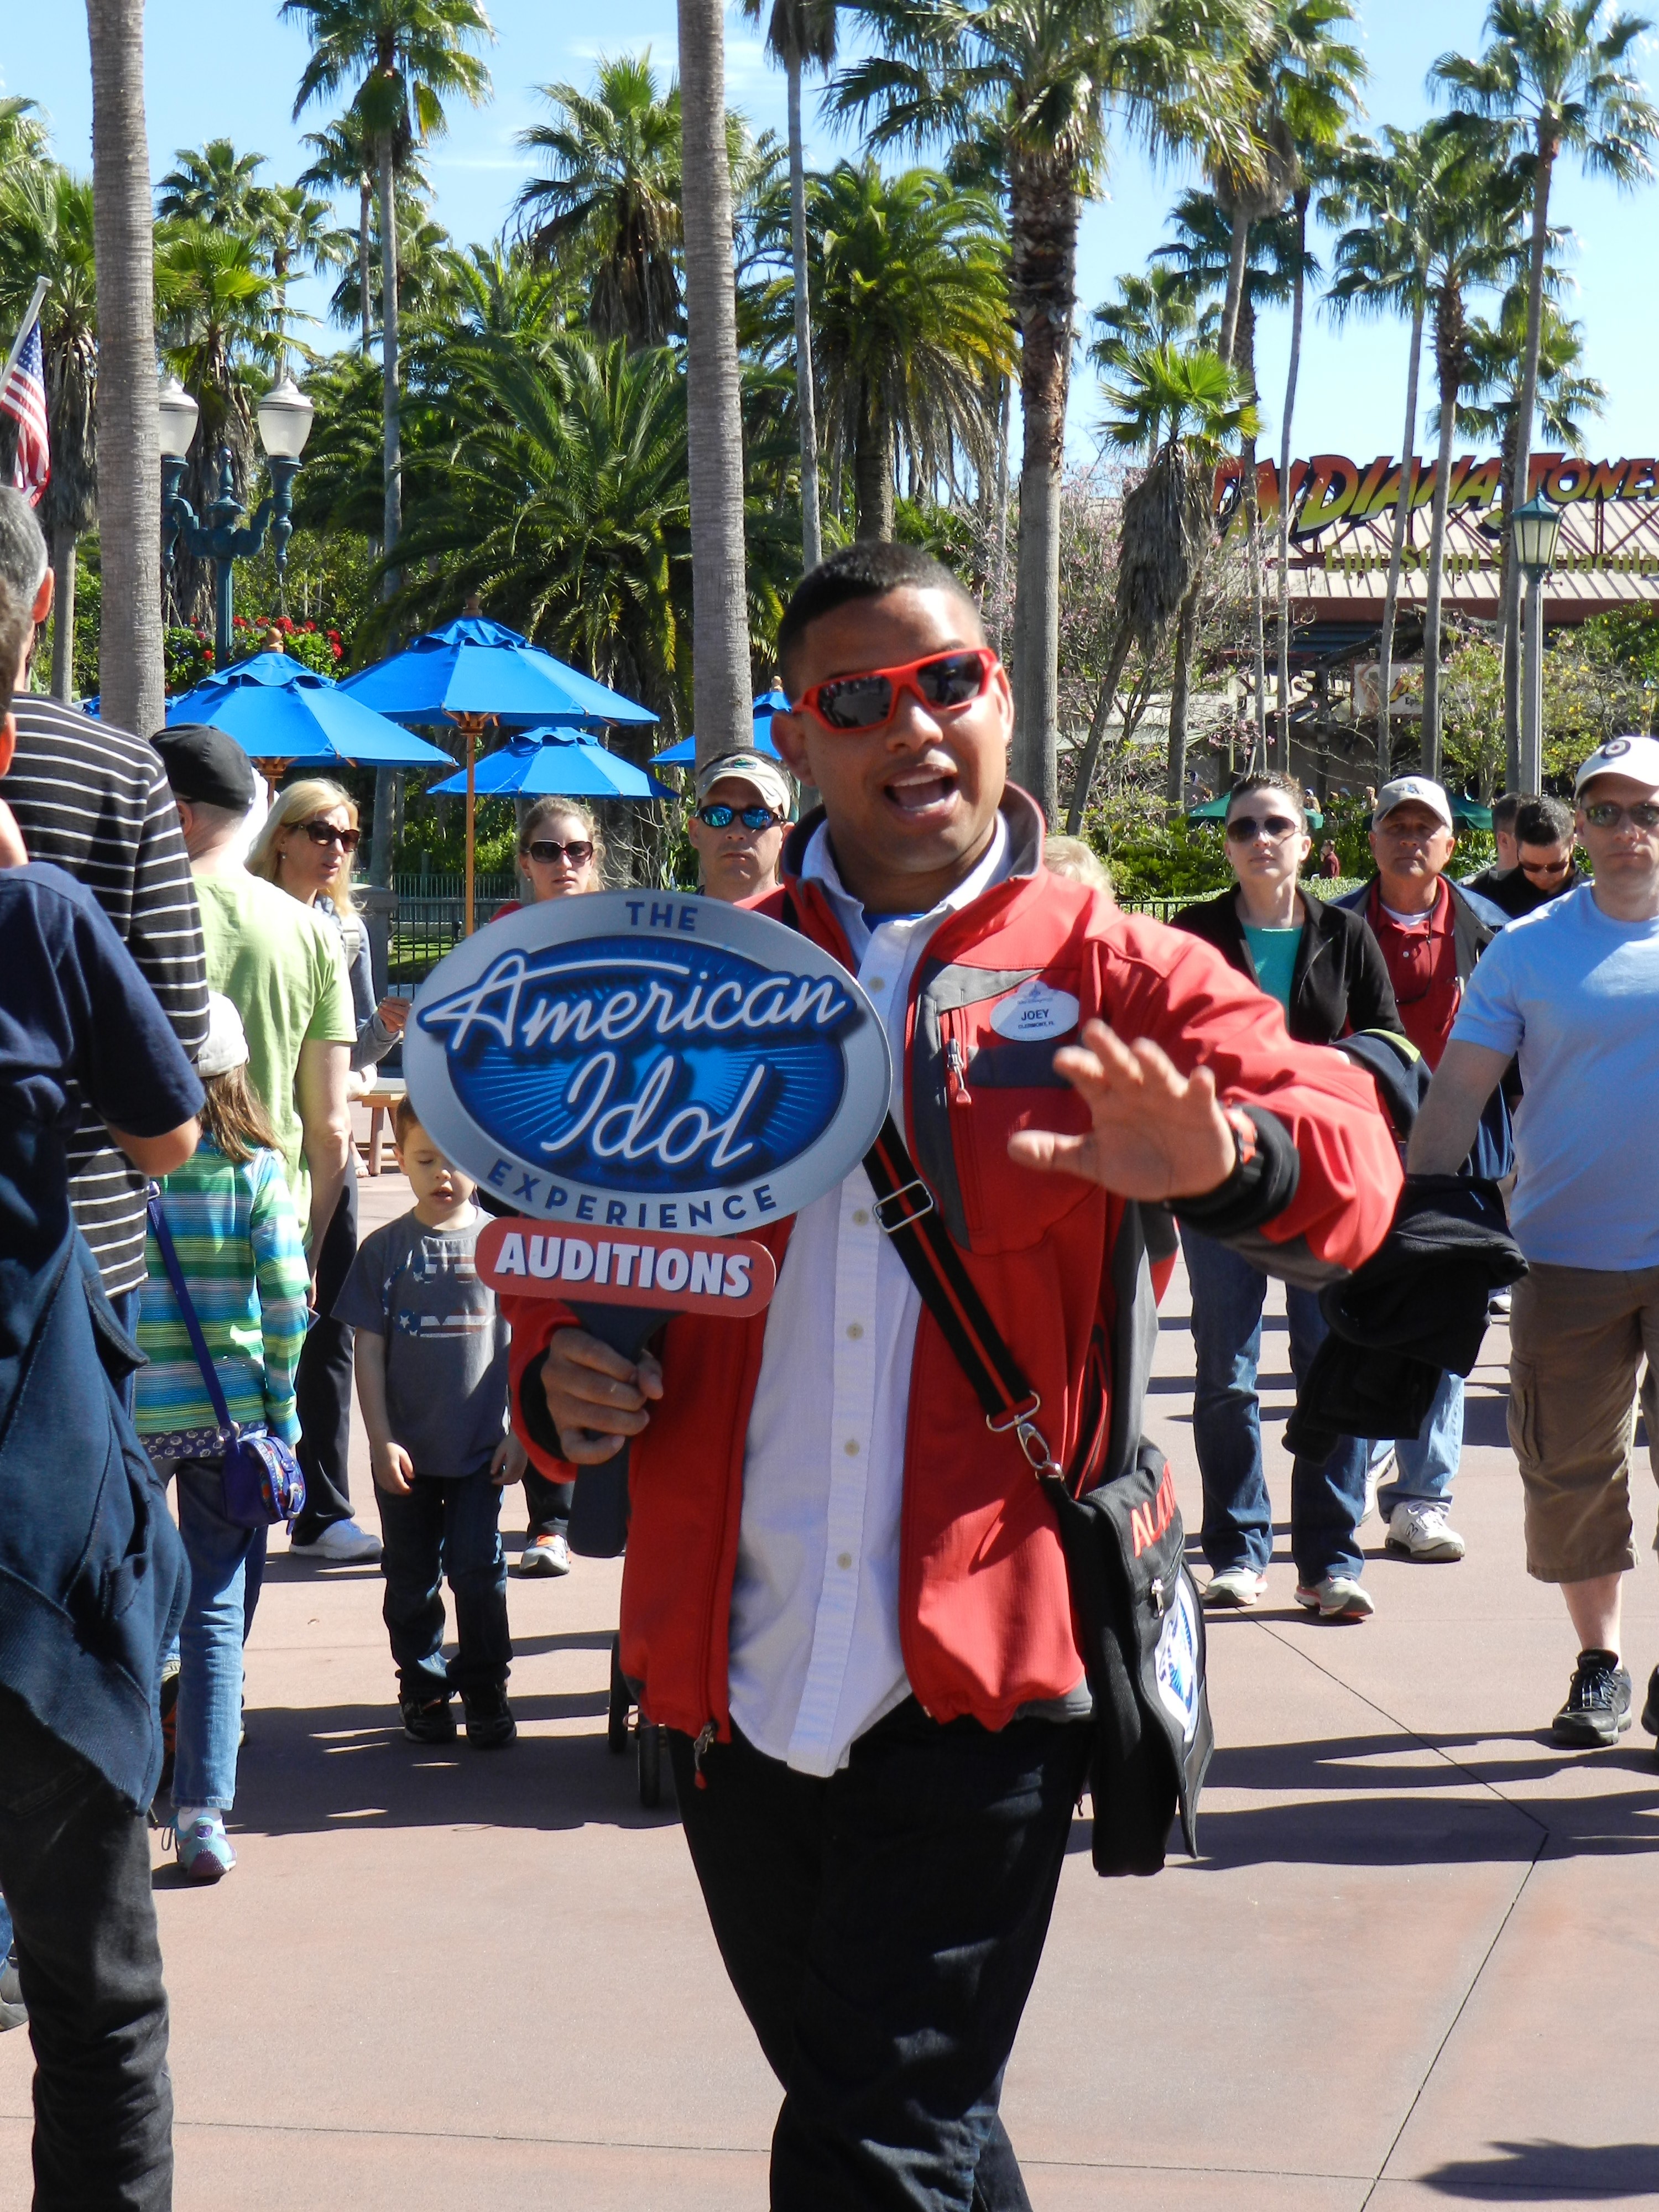 American Idol Experience Disney with Cast Member Waving